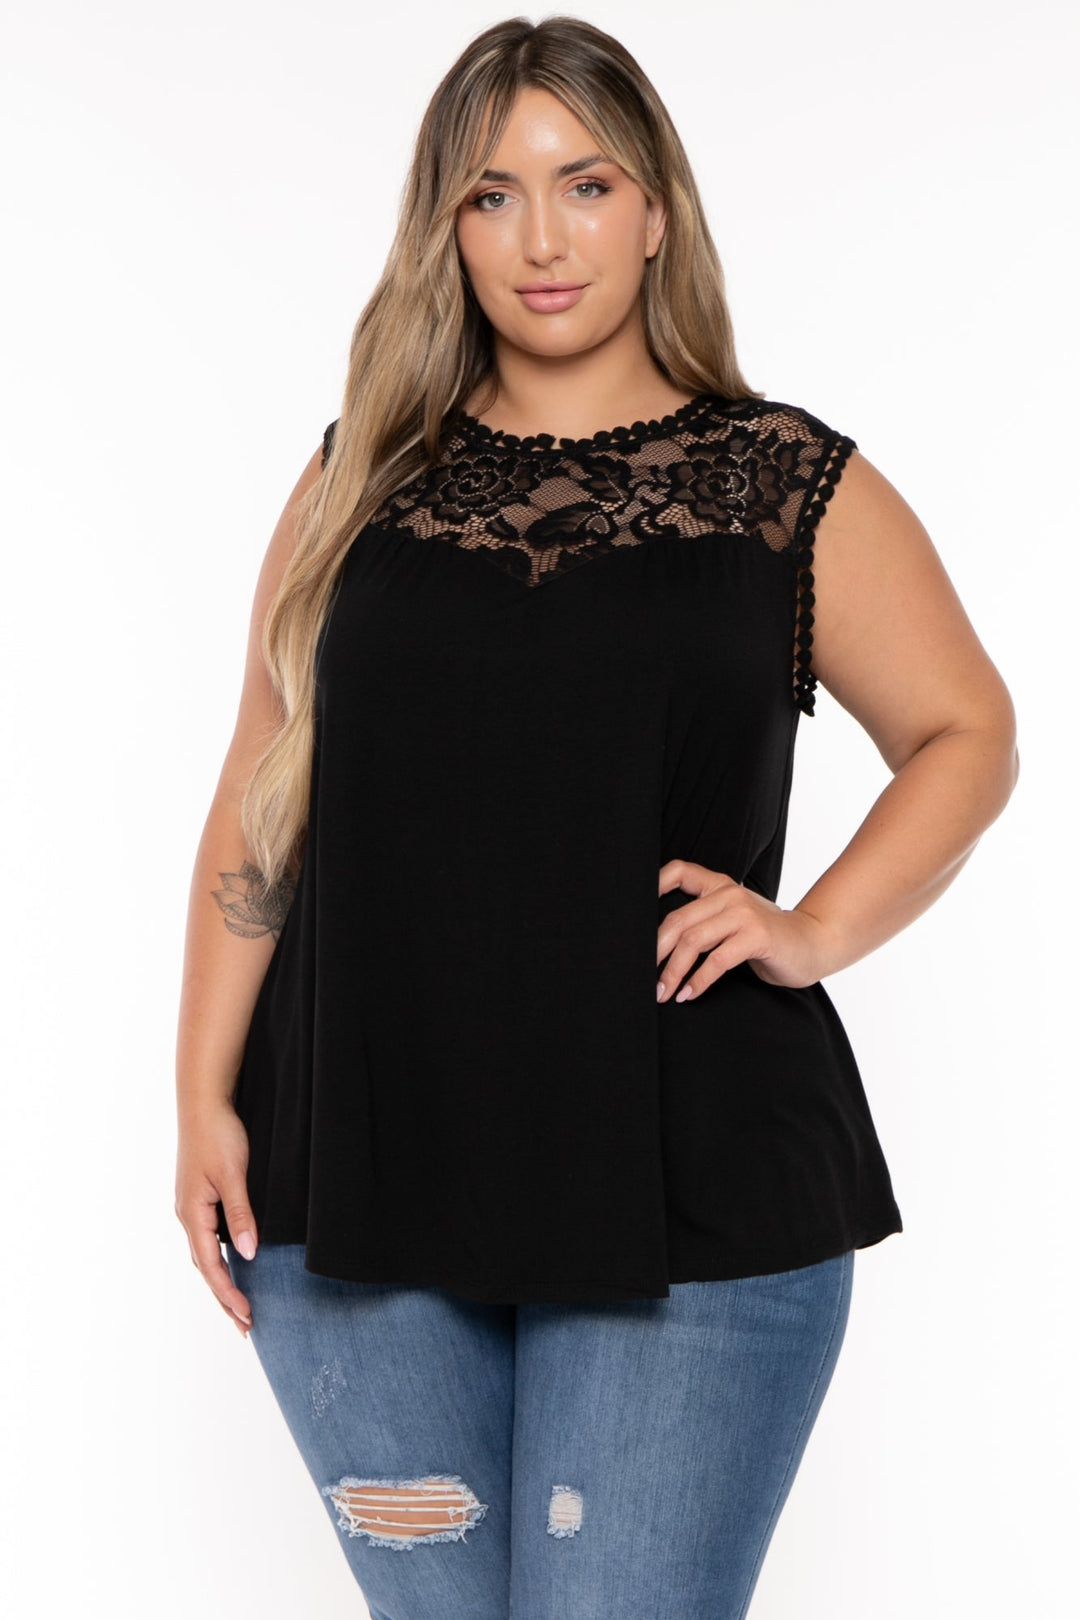 Emerald Tops Plus Size Aylin Sheer Lace Top- Black